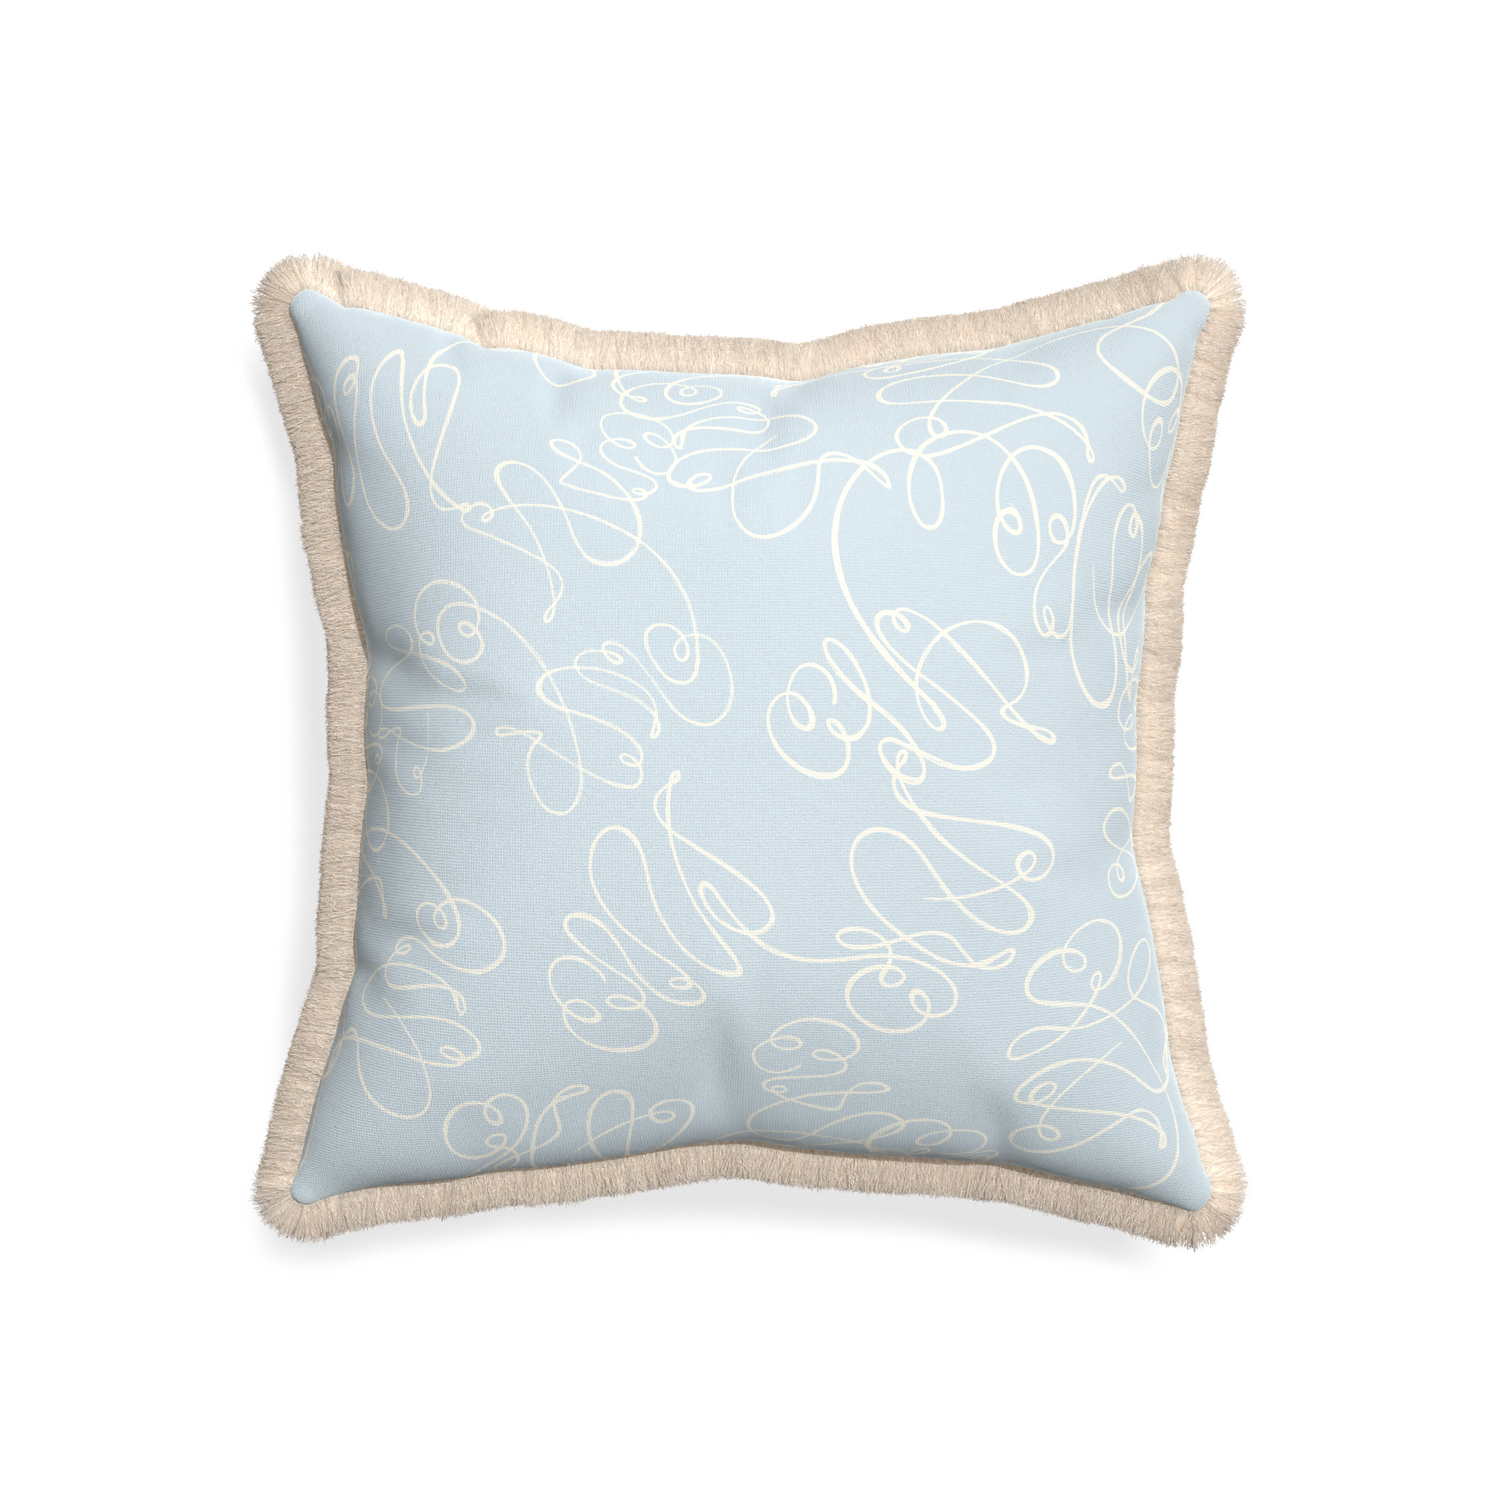 20-square mirabella custom powder blue abstractpillow with cream fringe on white background